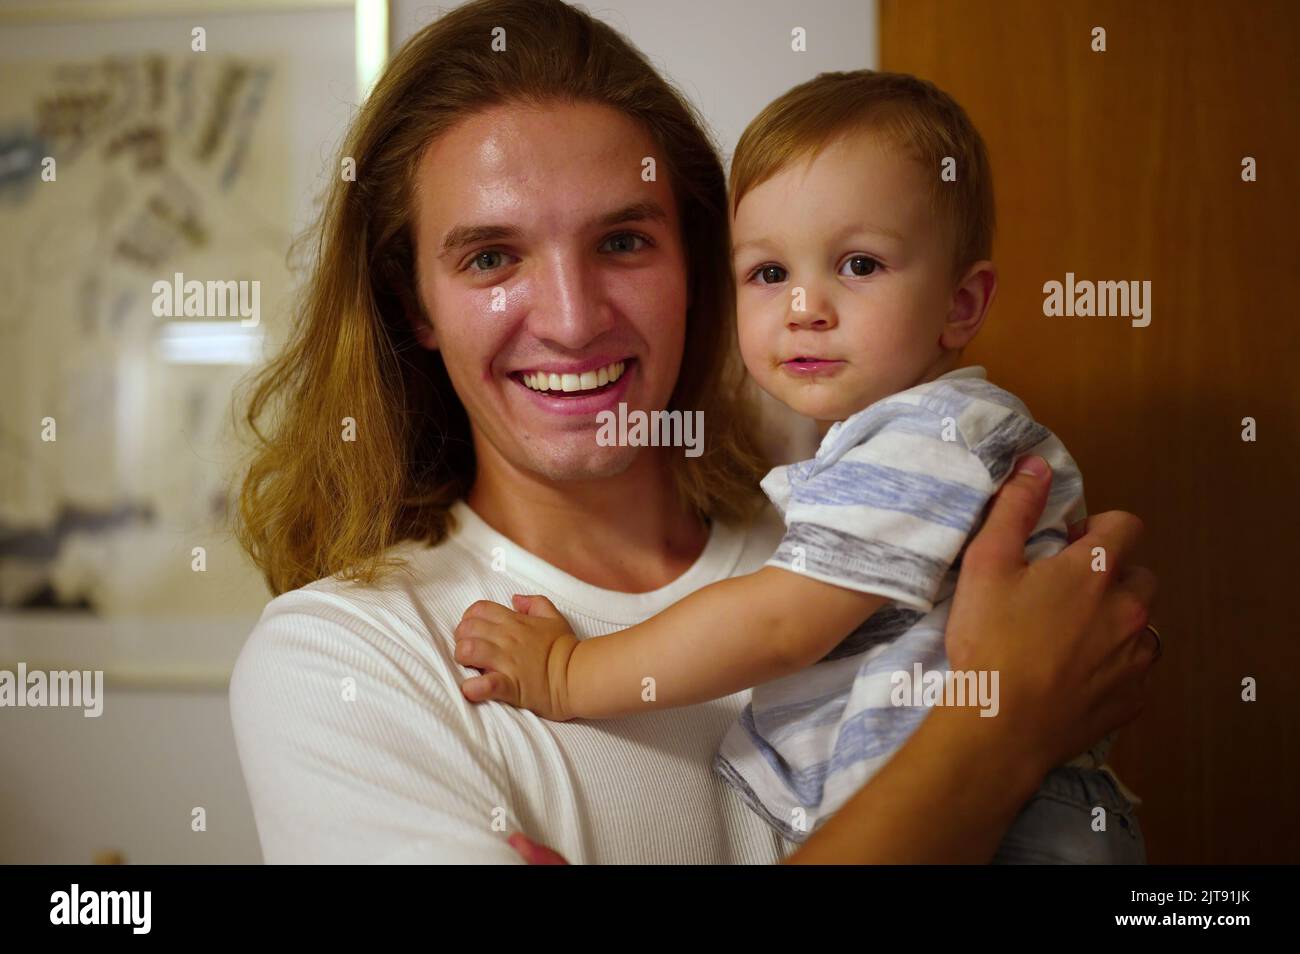 Handsome young man holding his little nephew Stock Photo